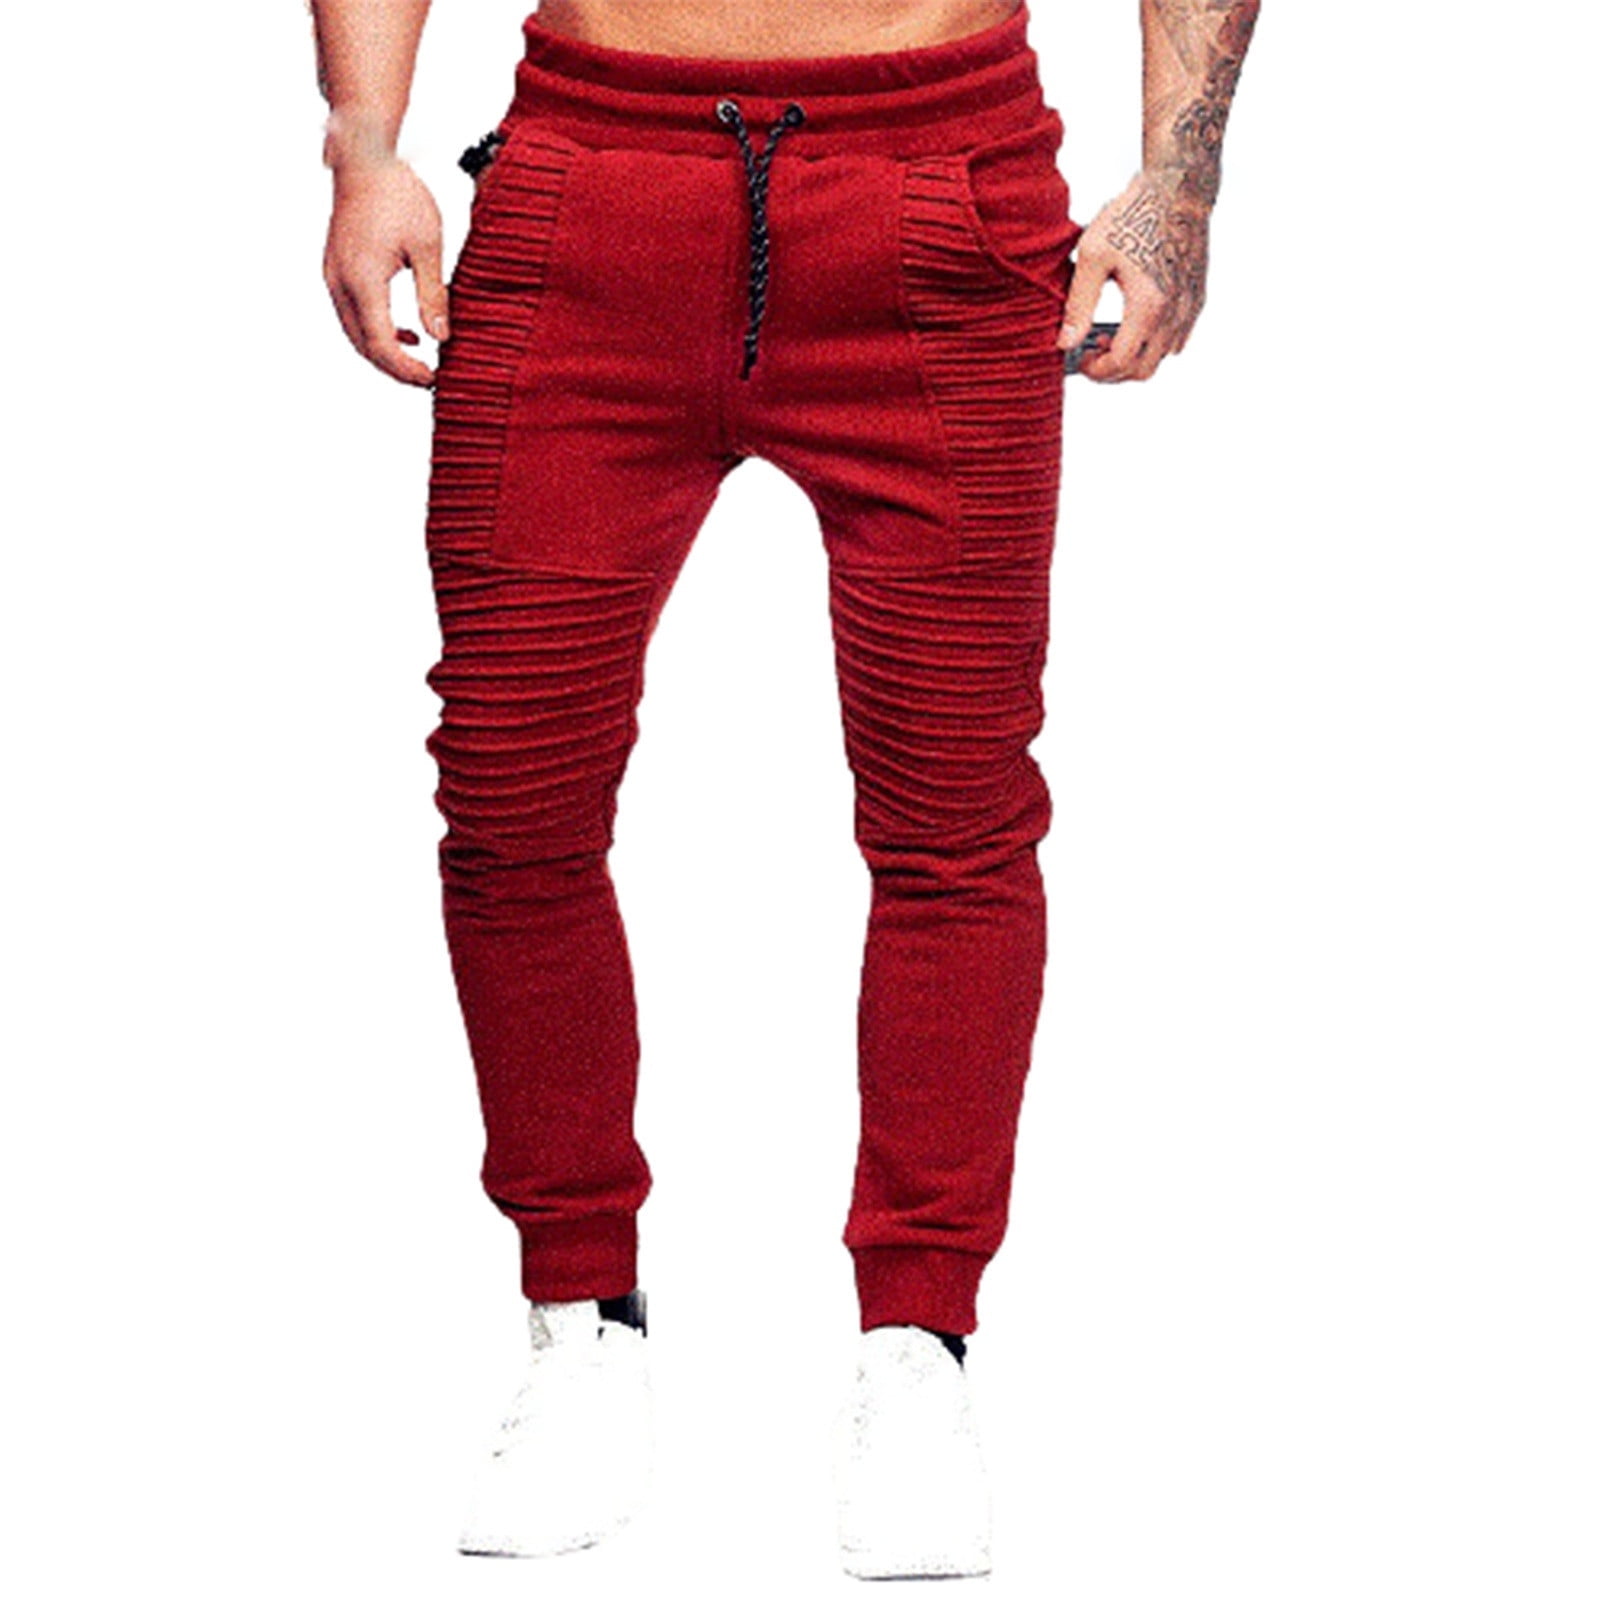 YYDGH On Clearance Men's Striped Tight Sweatpants Drawstring Hip Hop Joggers  Elastic Waist Fitness Jogger Pants for Workout Sports Activewear(Red,M) 